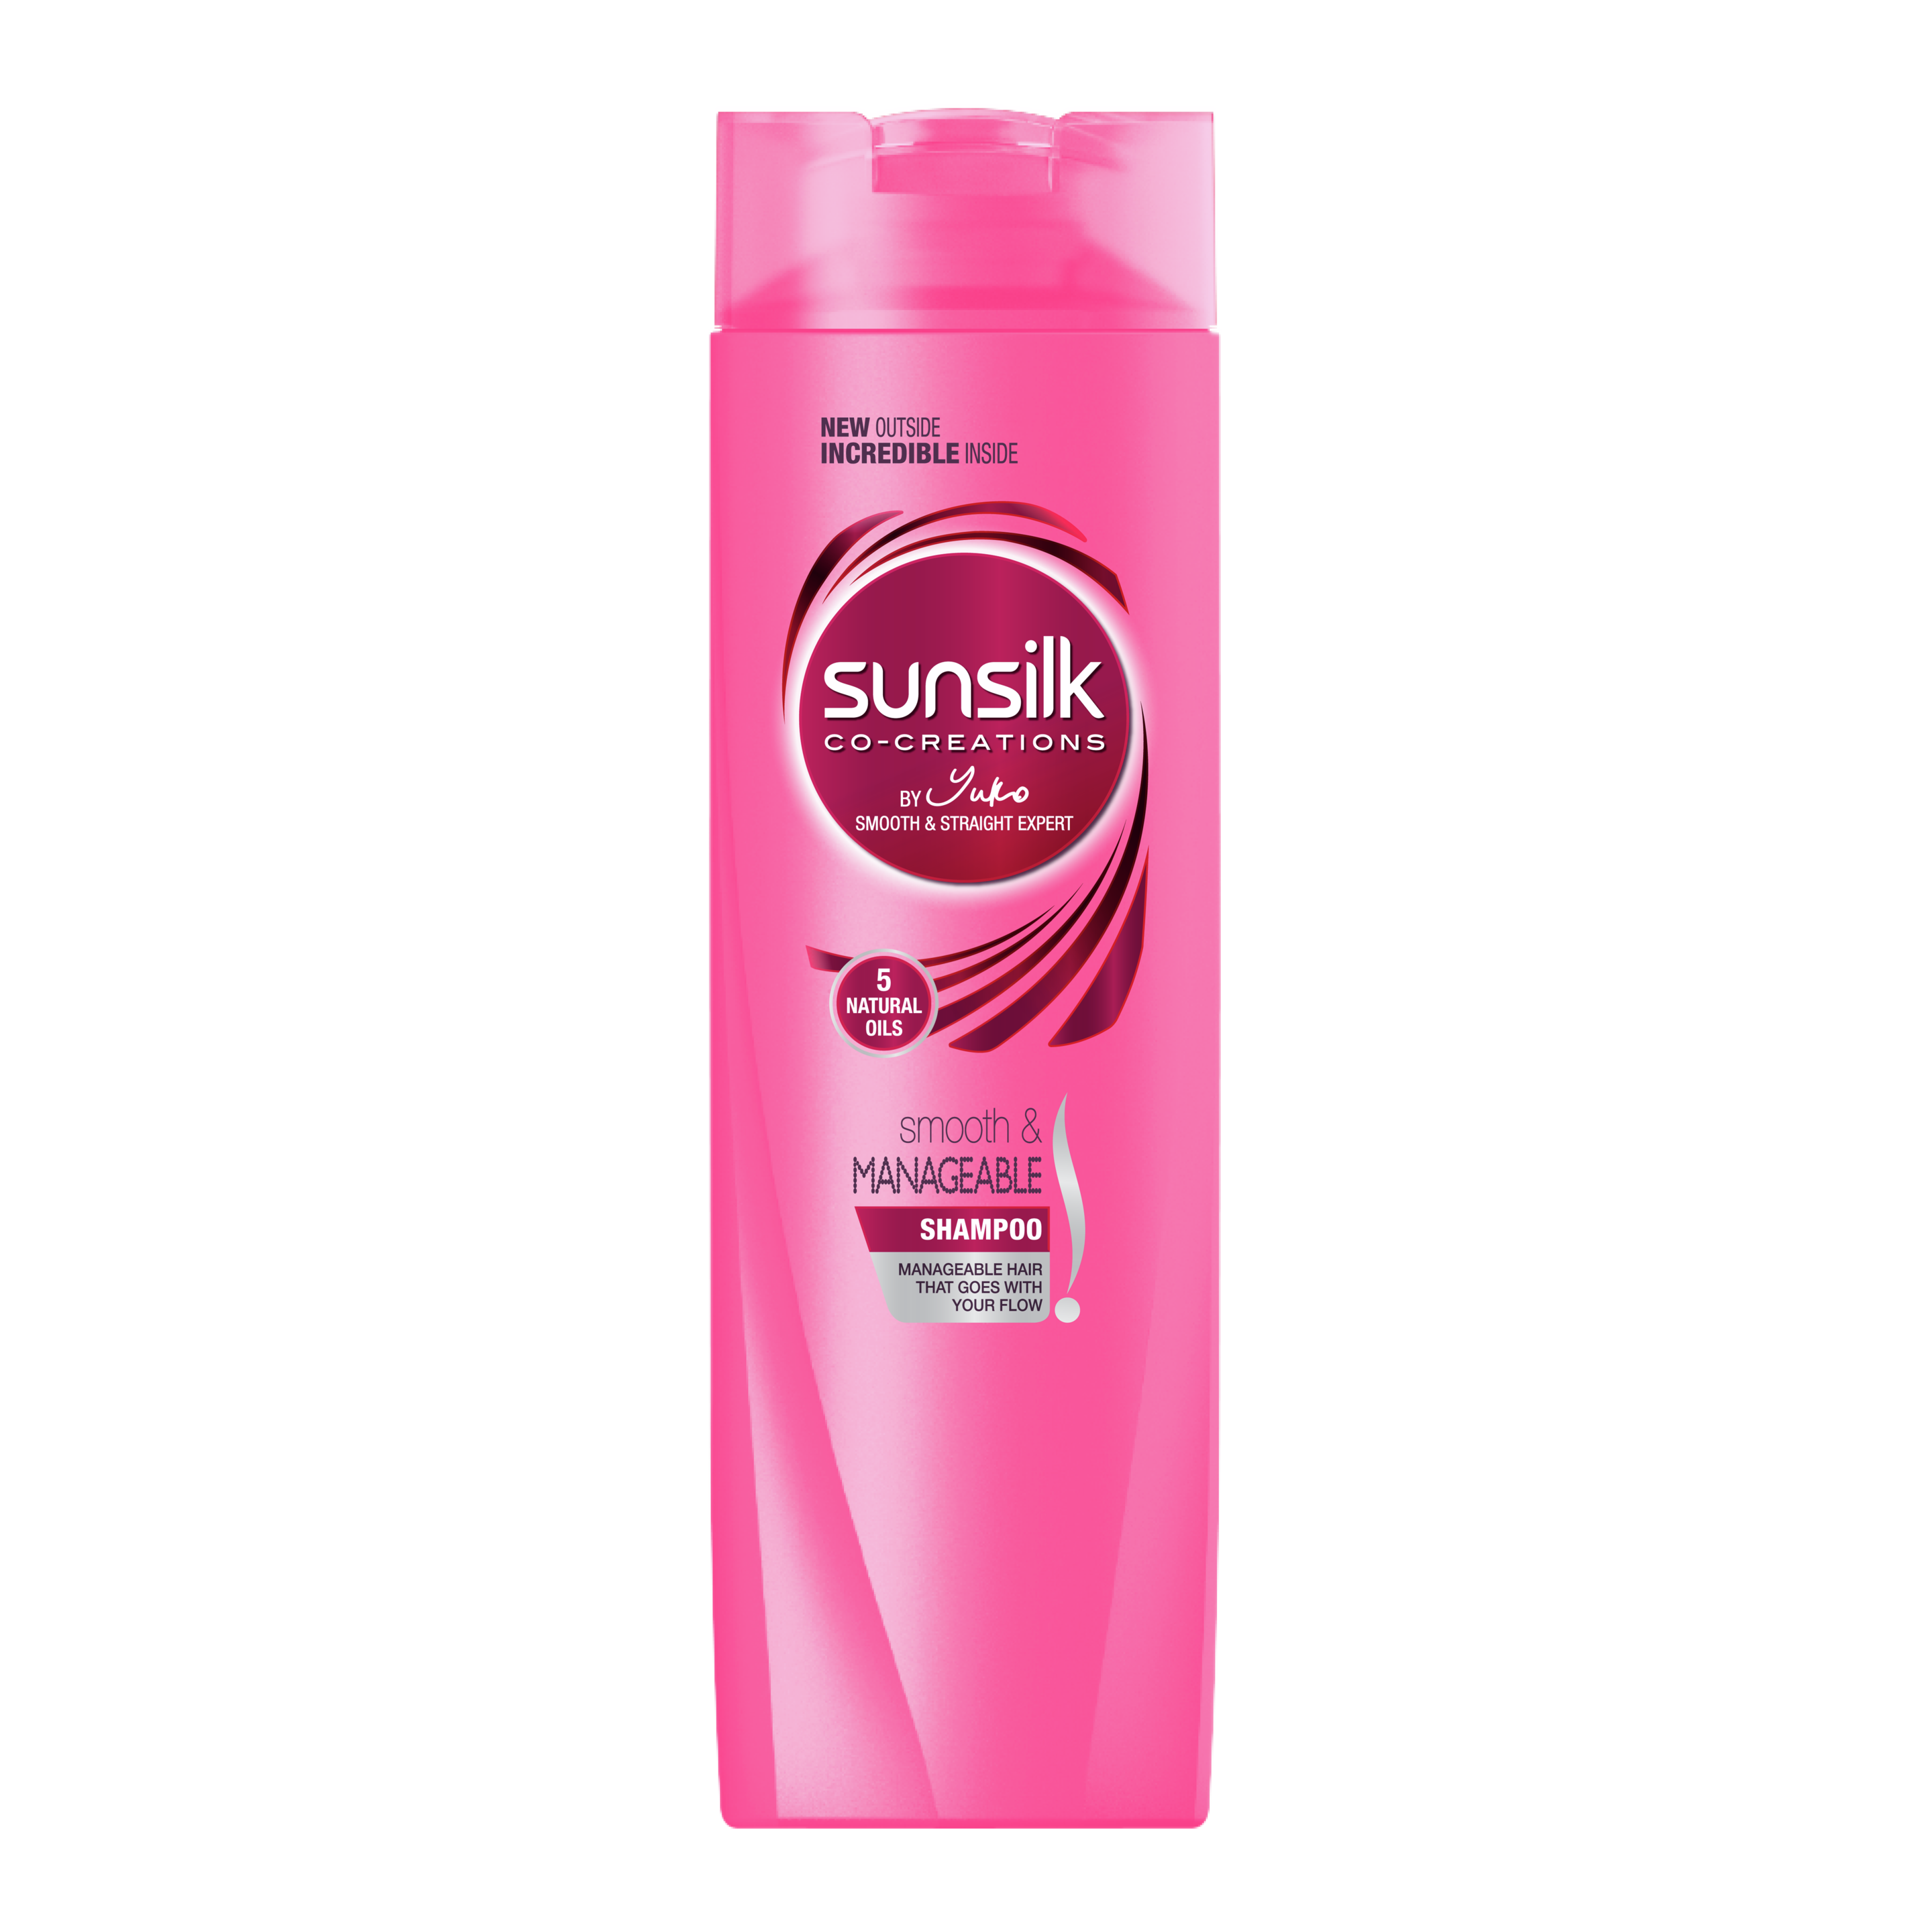 Sunsilk Smooth and Manageable Shampoo 160ml front of pack image